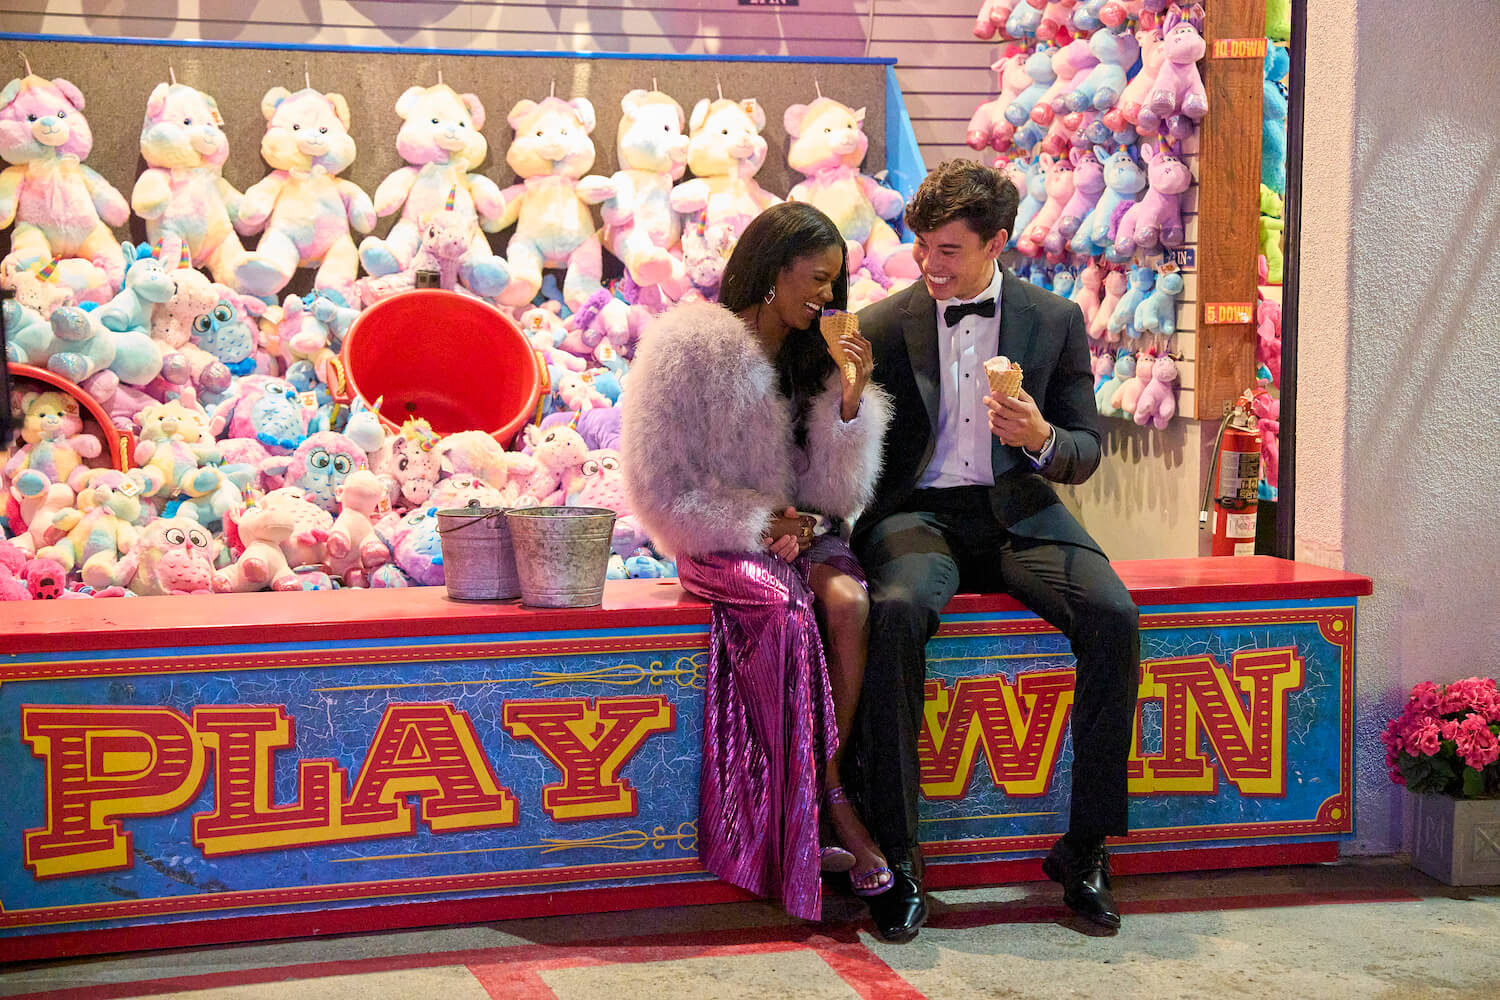 Charity Lawson and Warwick Reider eating ice cream in an amusement park in 'The Bachelorette' 2023 episode 3